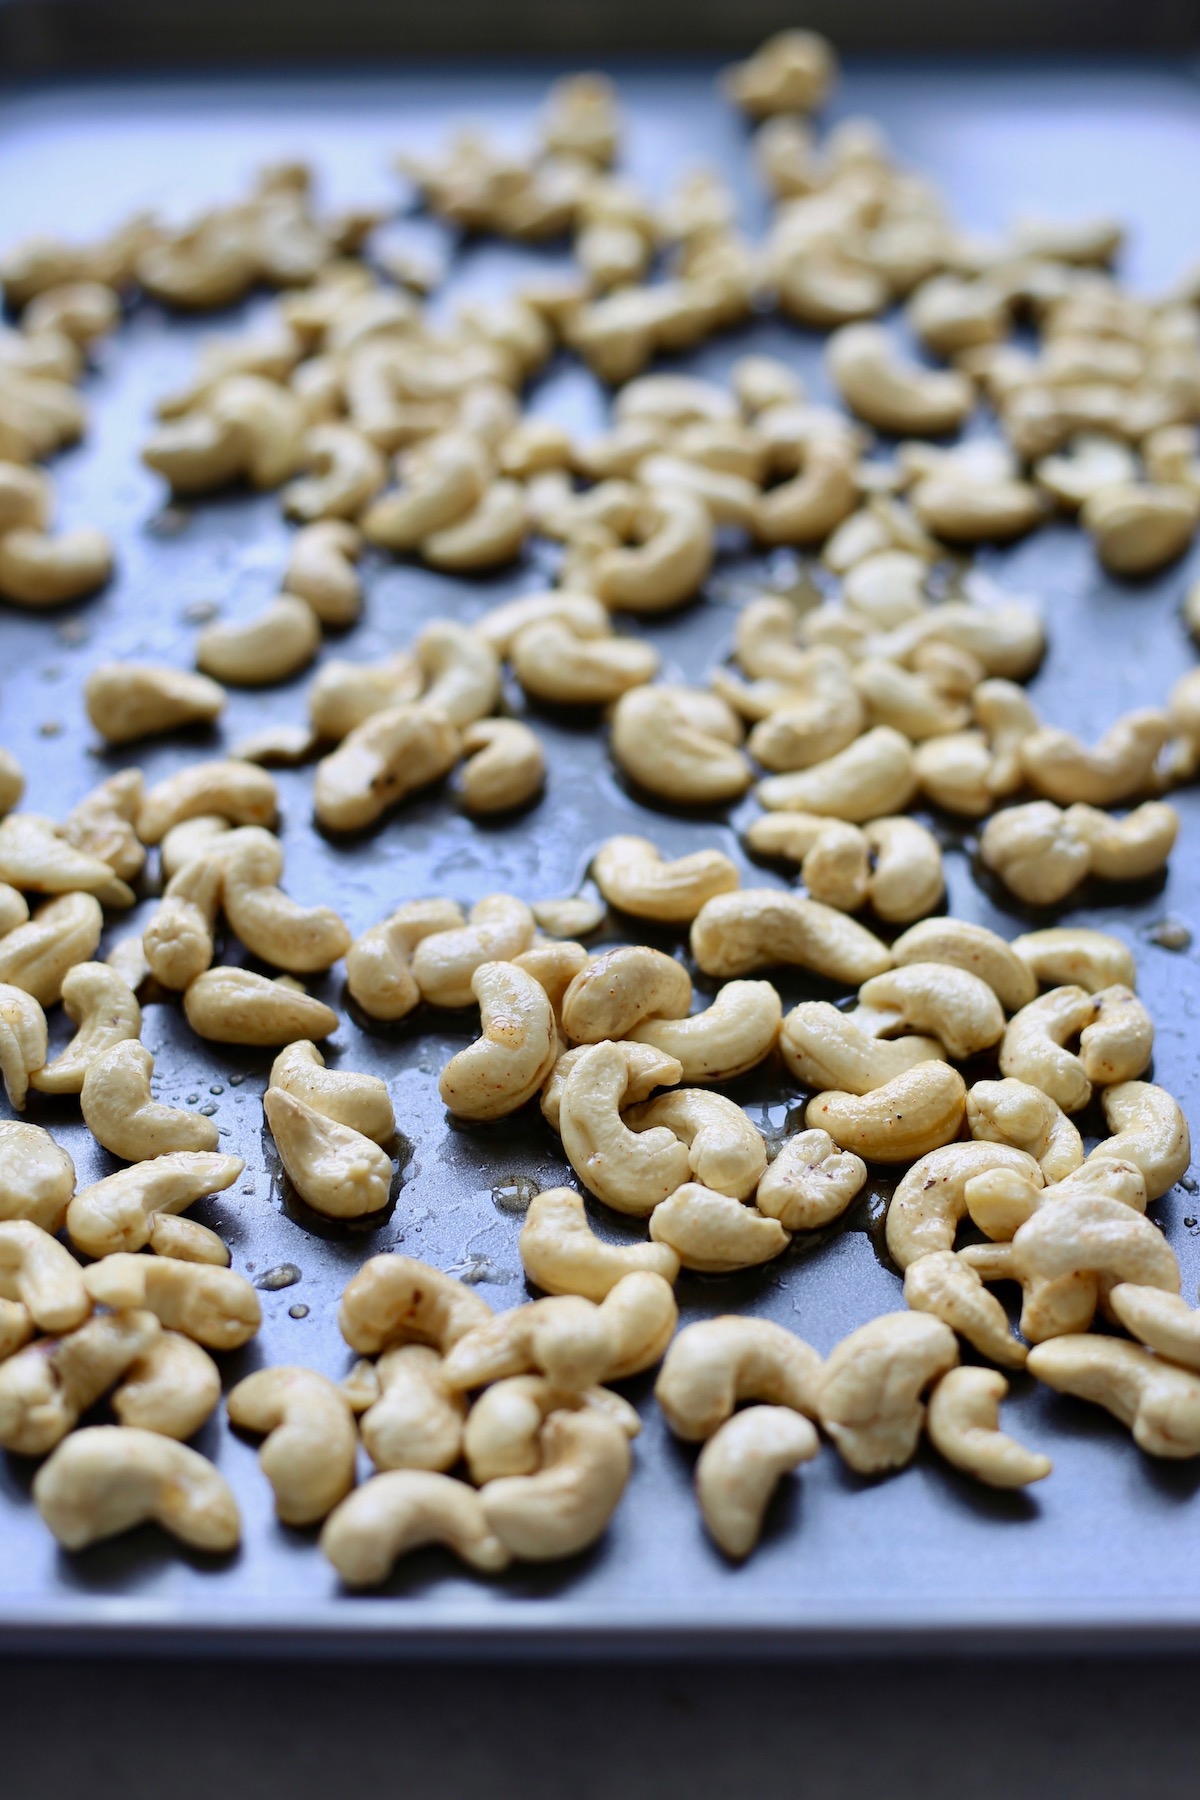 Raw cashews coated in oil and maple syrup on a baking sheet.